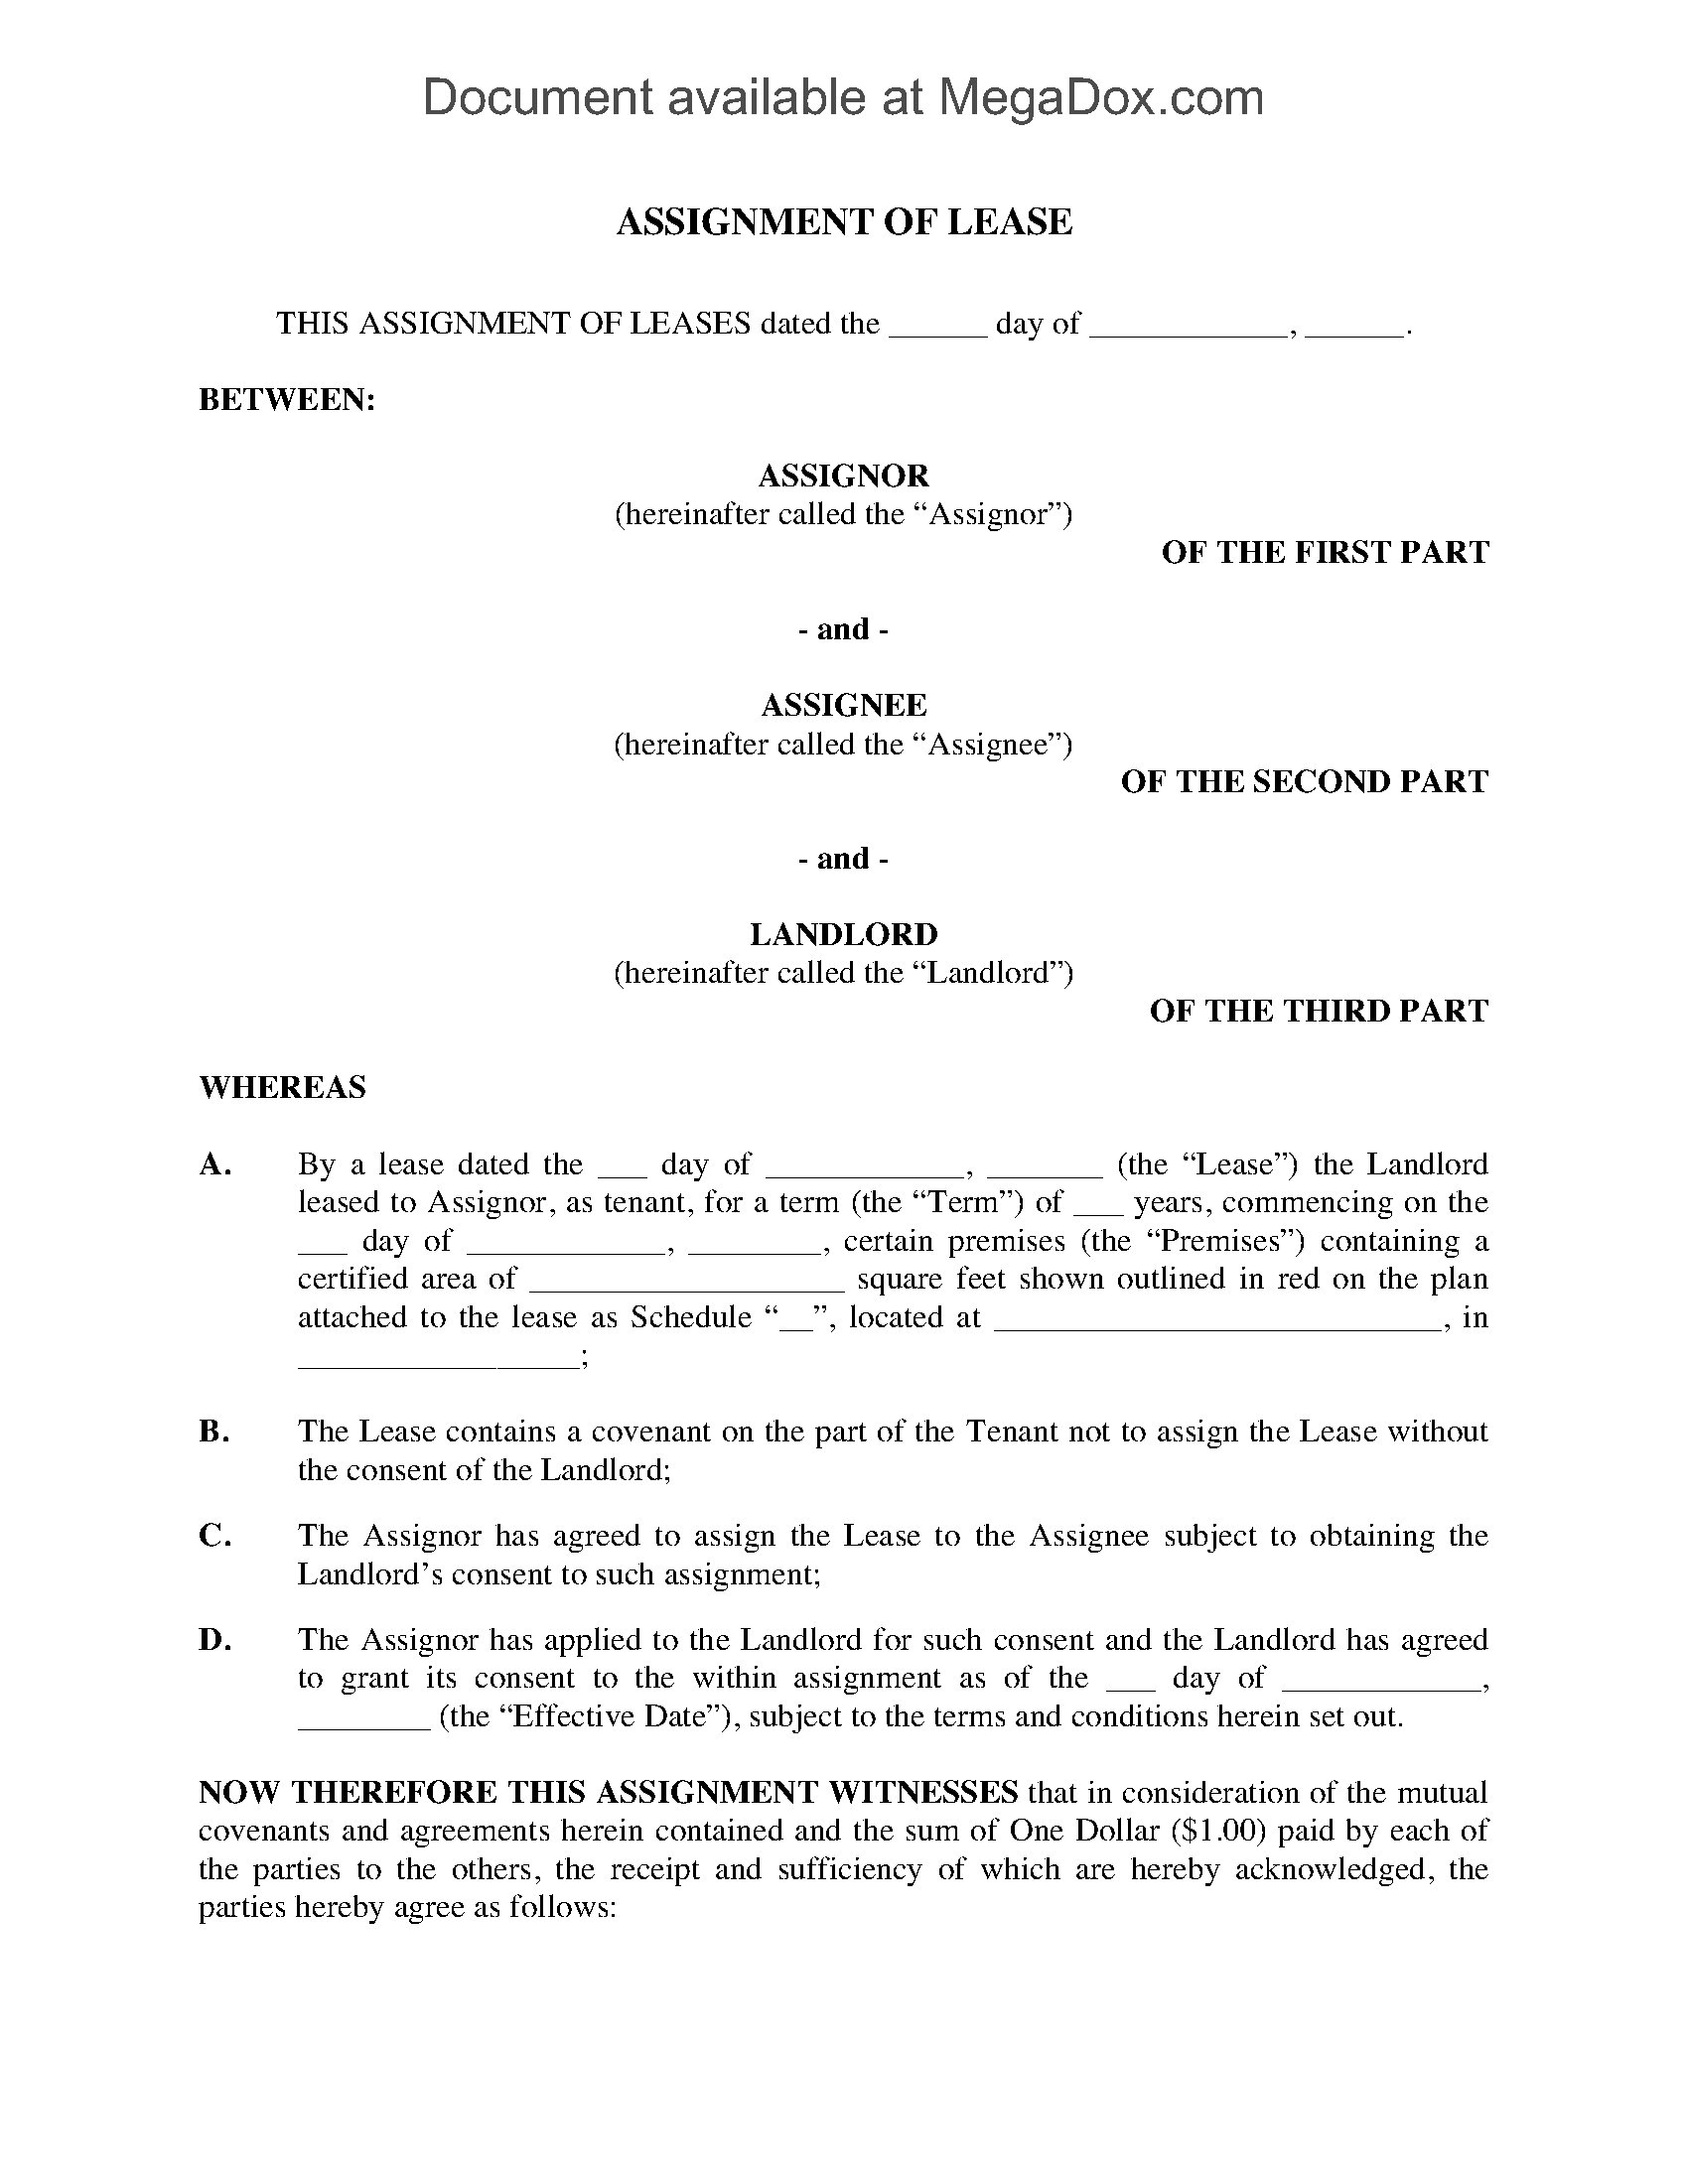 assignment of lease by tenant